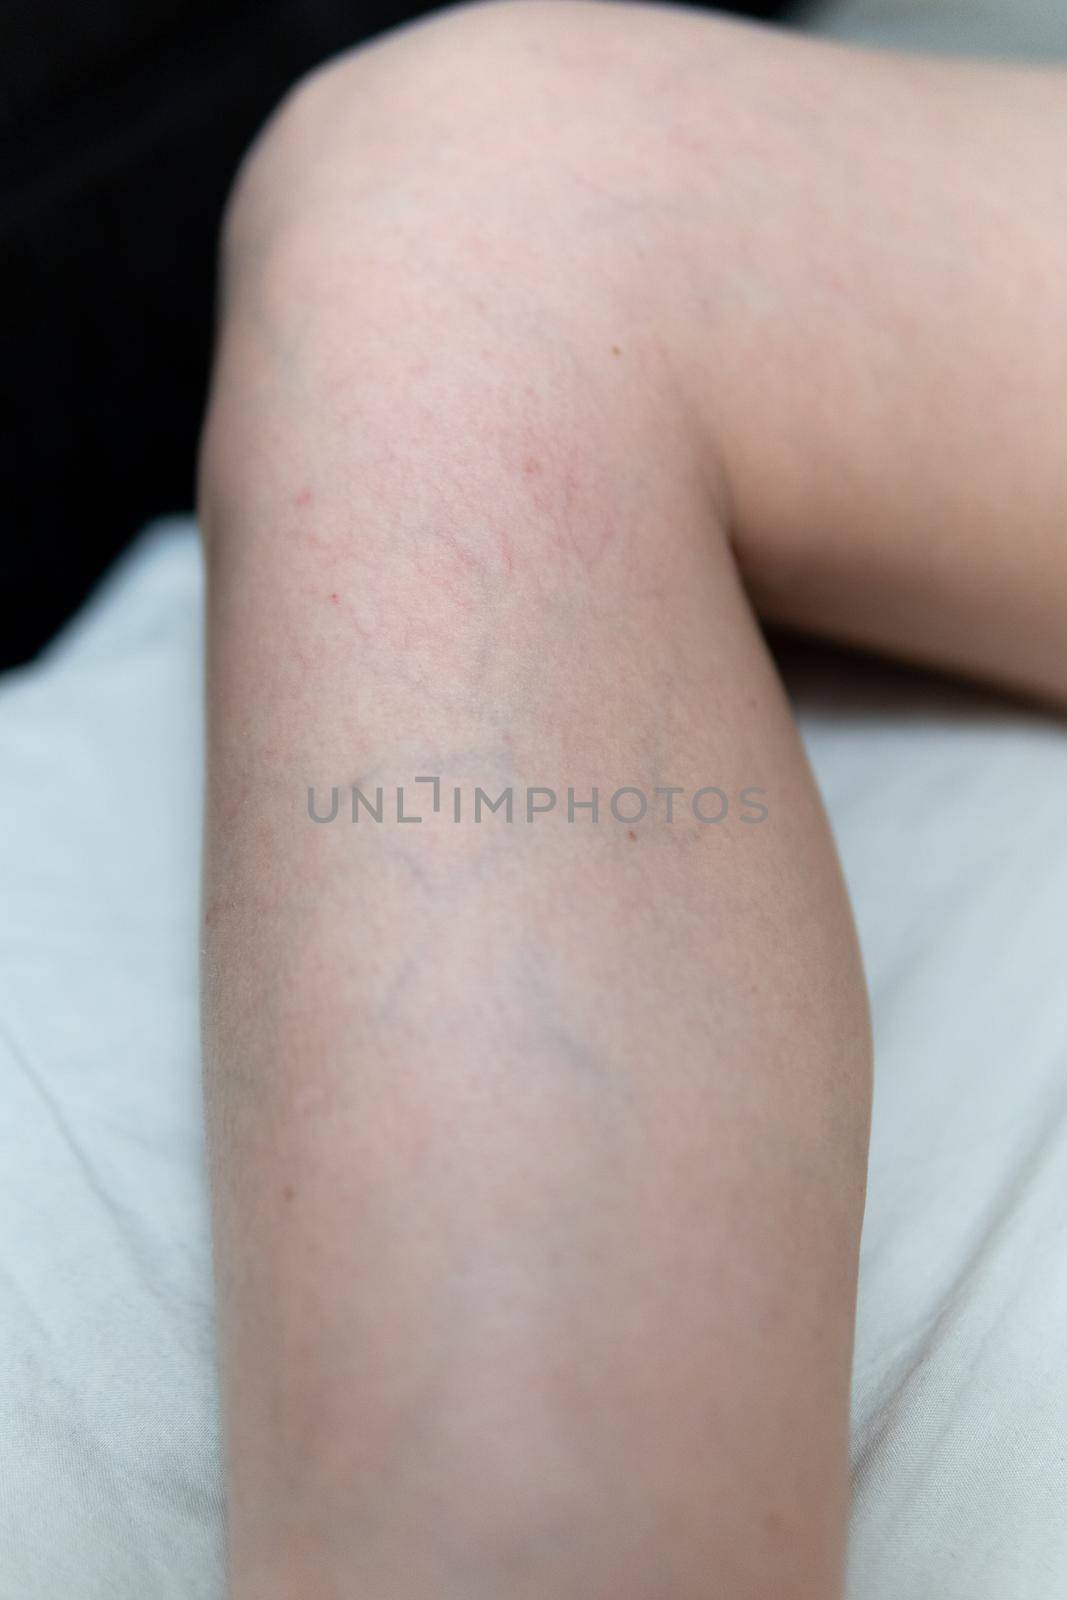 removal of blood vessels by laser vessel body surgery, spider painful cosmetic veins pathology. Help lifestyle twisted, aesthetic telangiectases physical